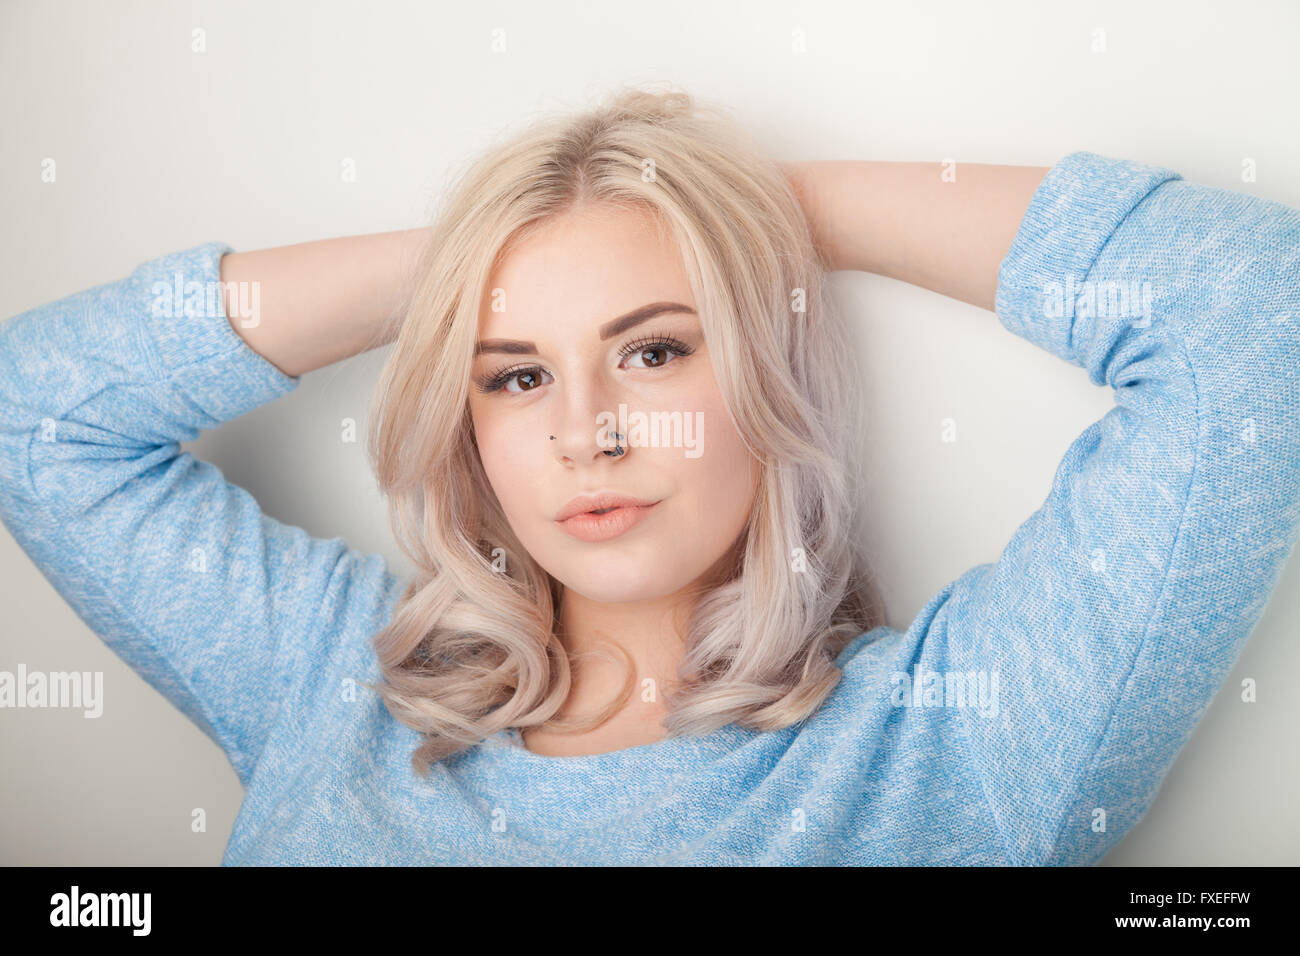 Blond teenage girl standing with arms behind her head. Stock Photo